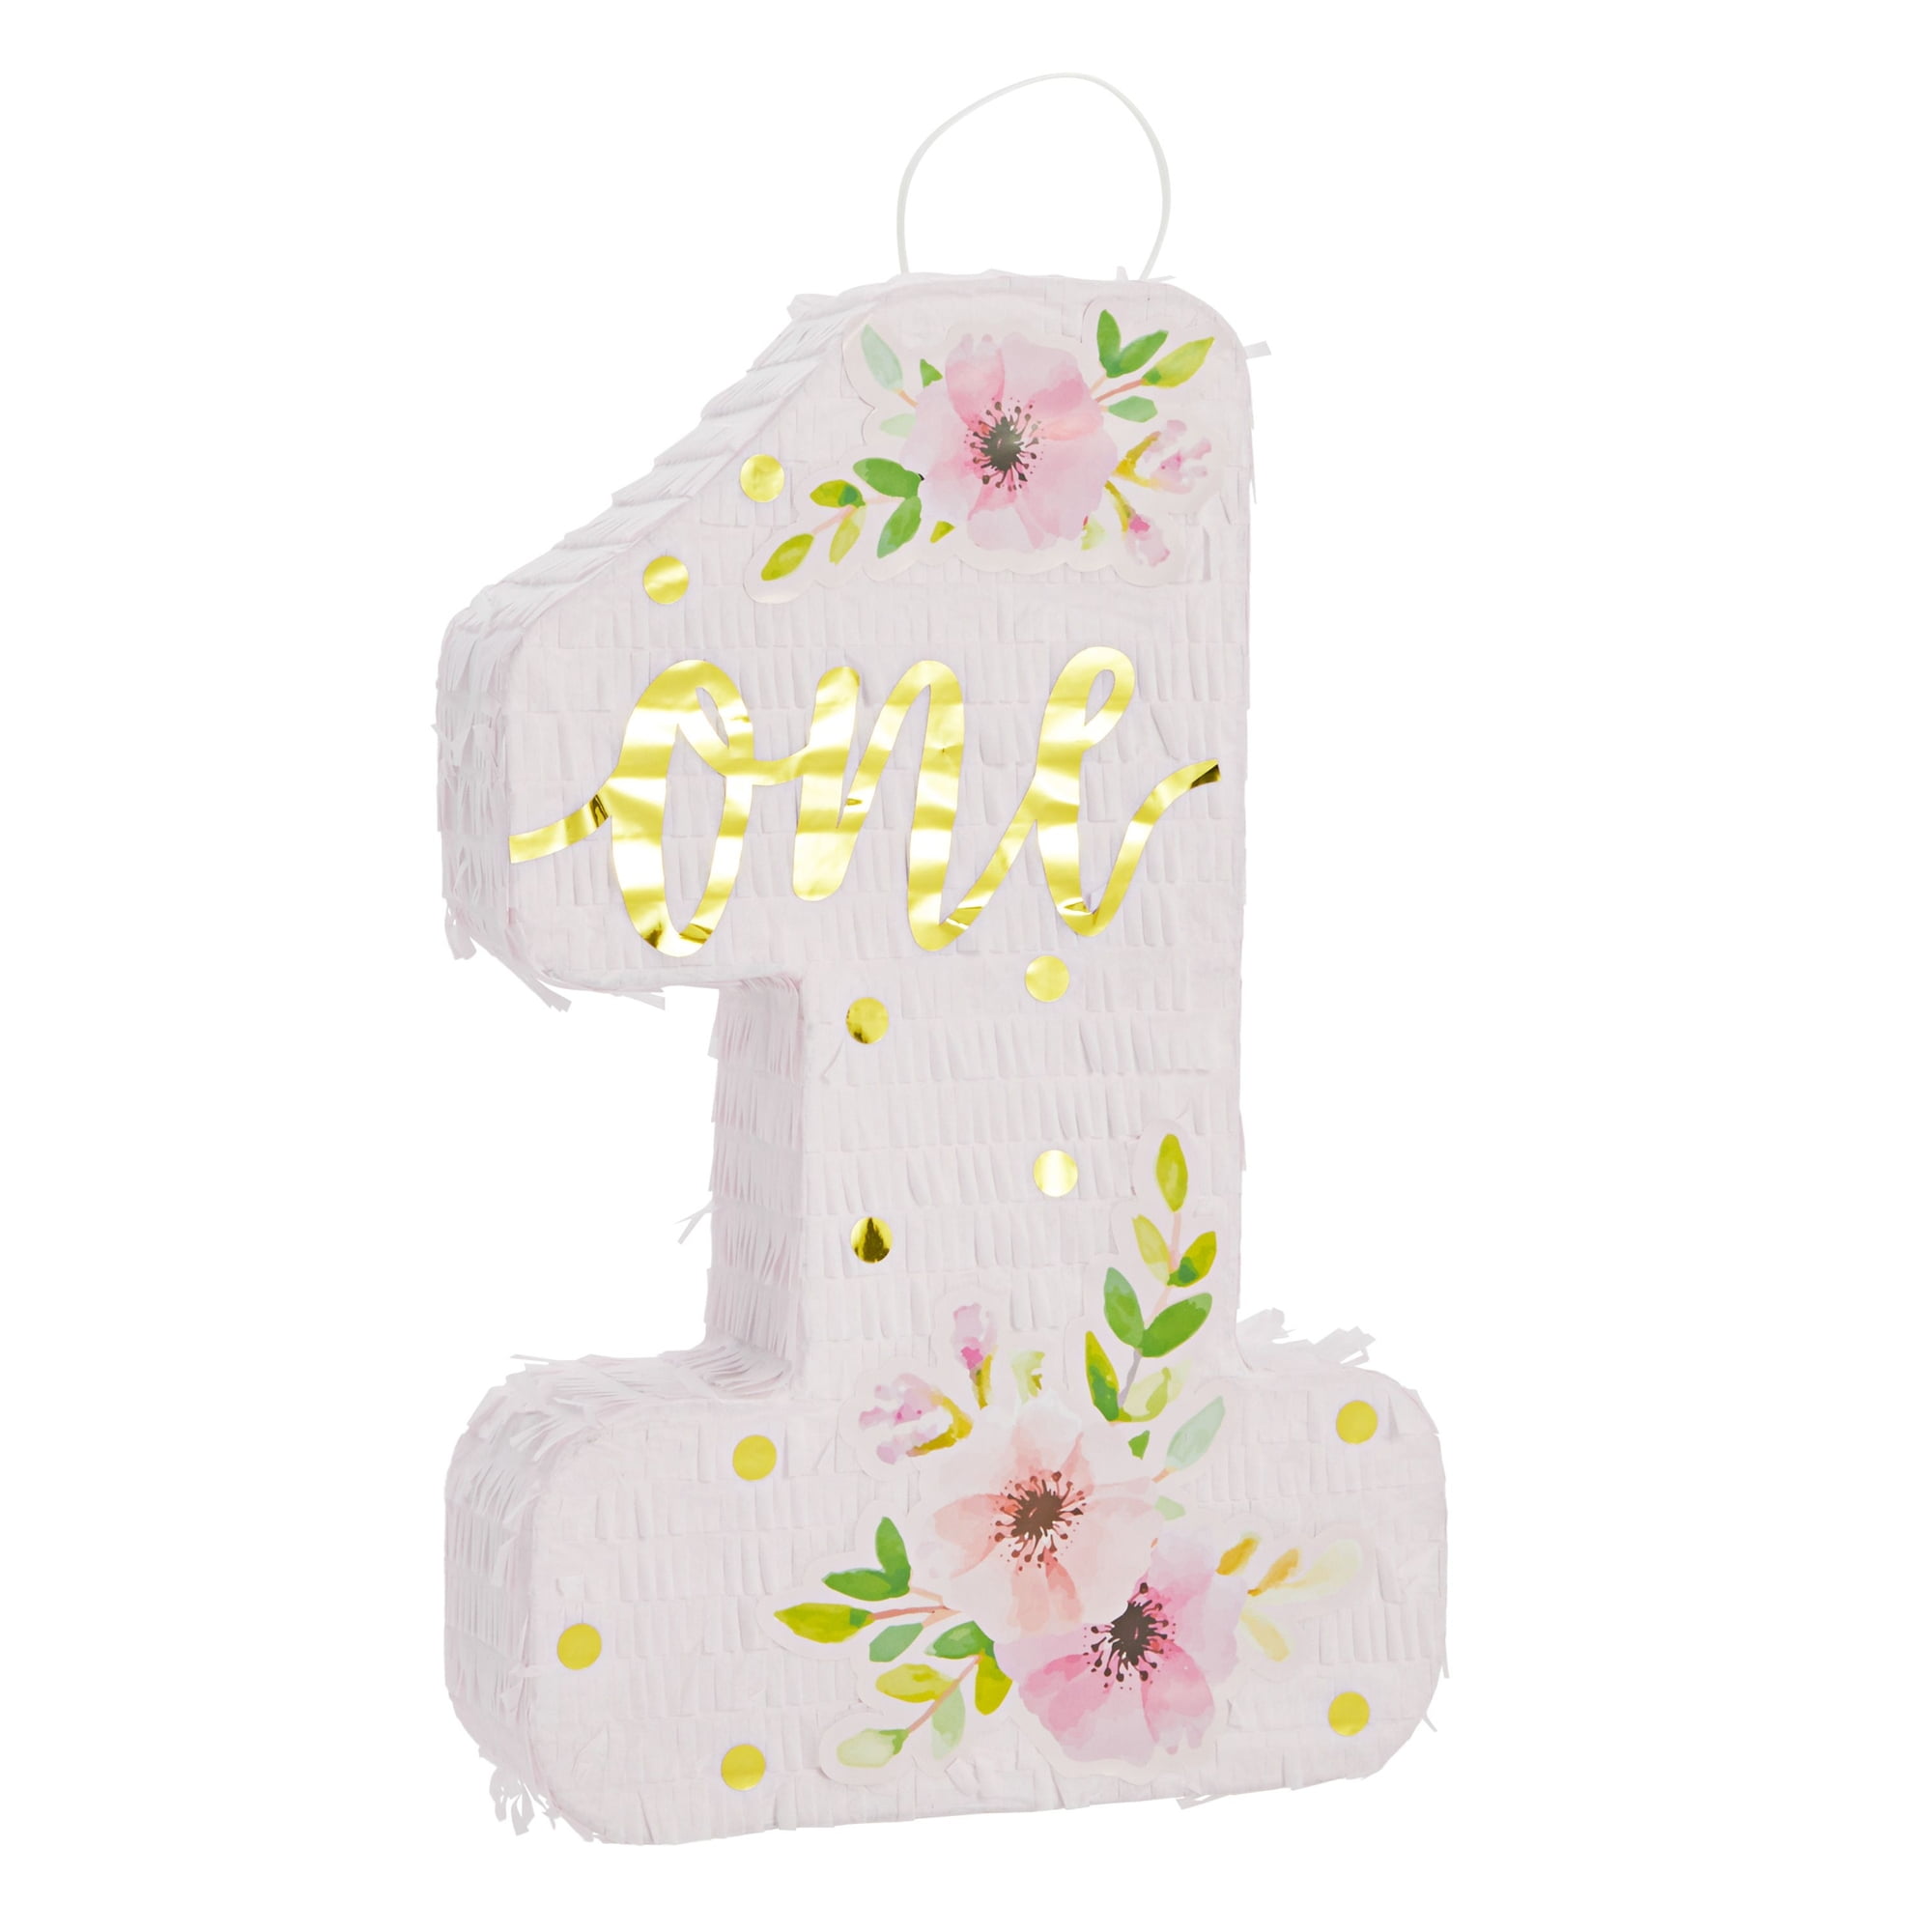 Small Floral Number 1 Pinata with Gold Foil + Pull Strings for Girls 1st Birthday Party Decorations, 16.5 x 10.6 x 3 in